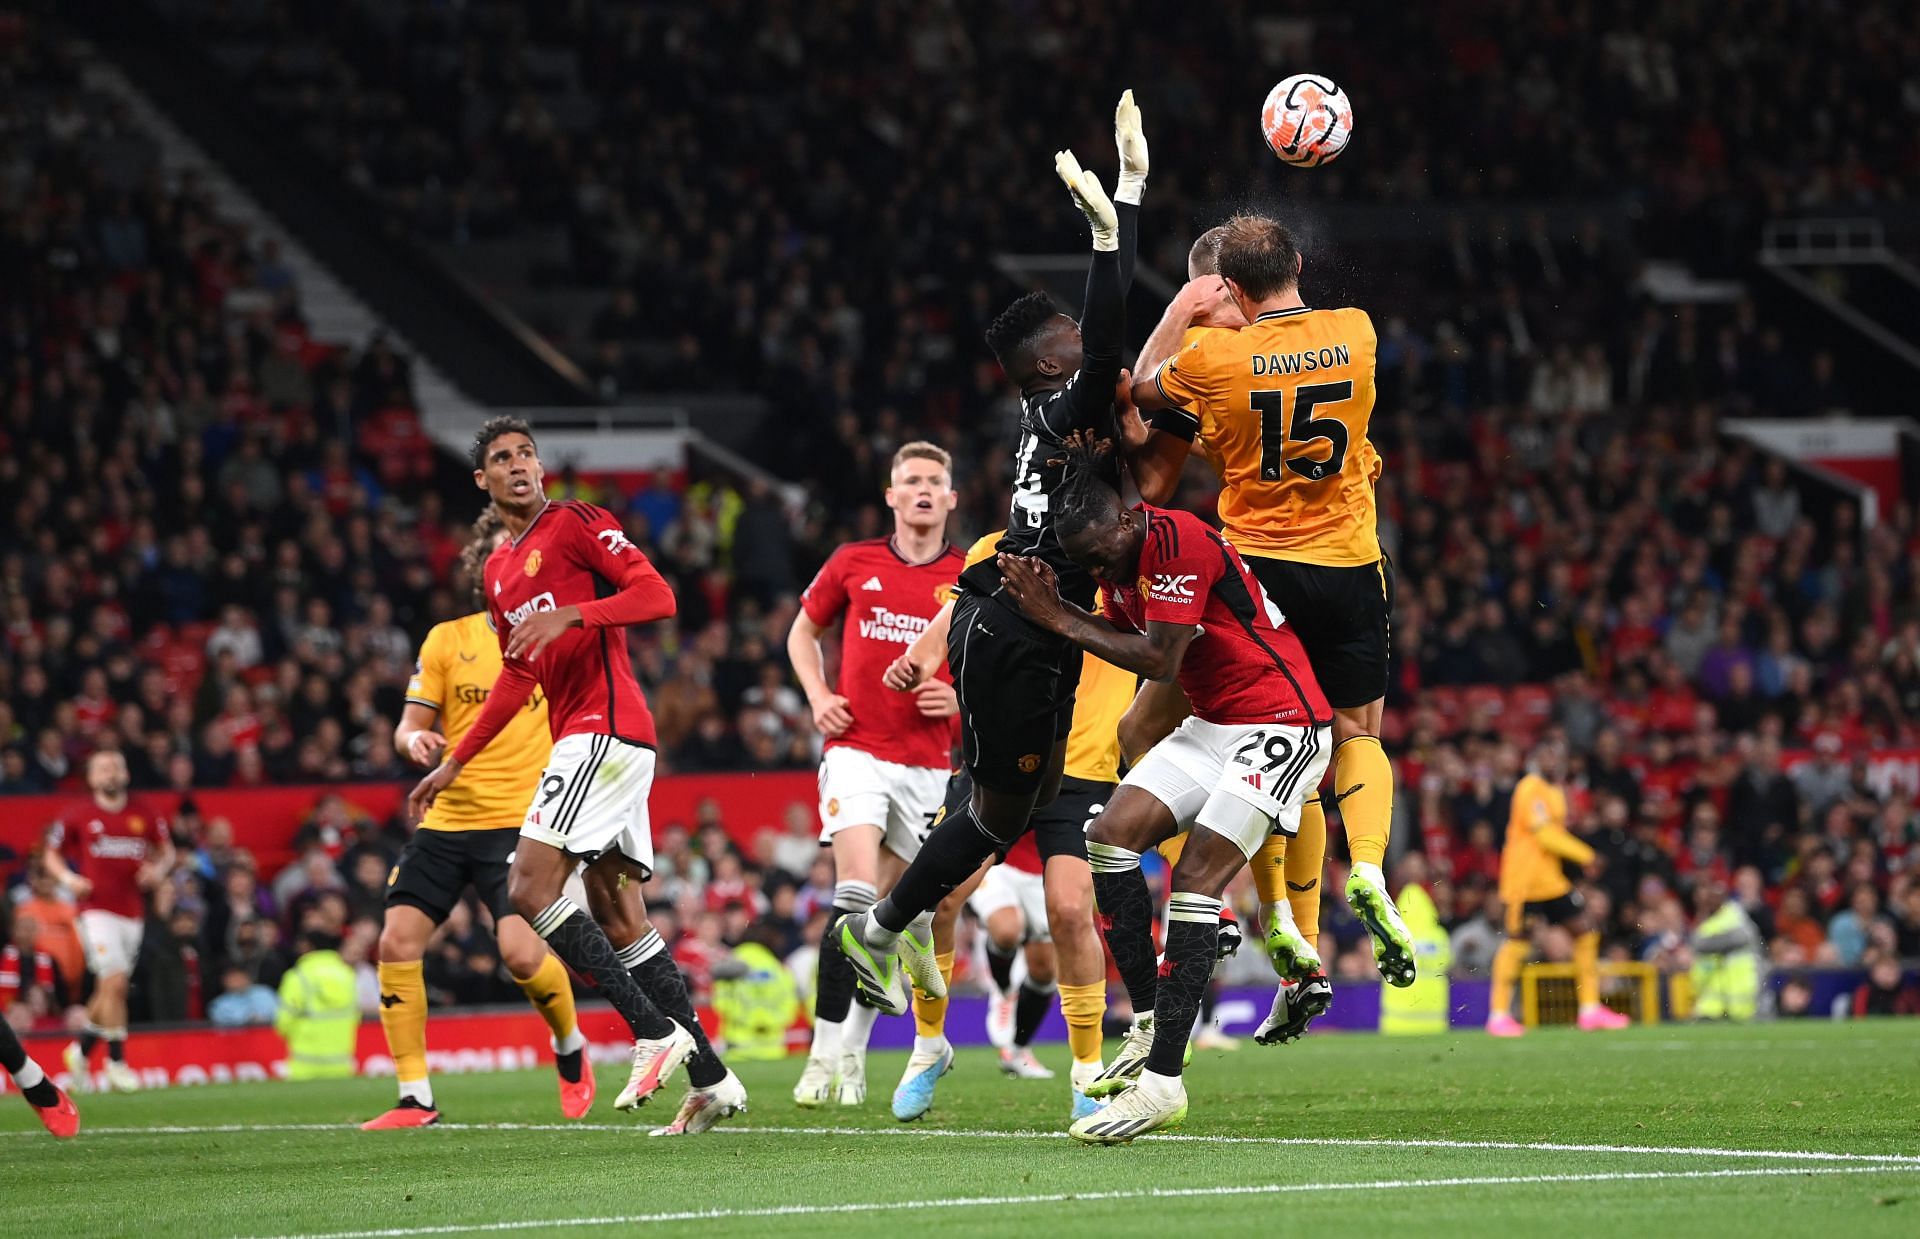 The new Red Devils shot-stopper made his debut against Wolves.